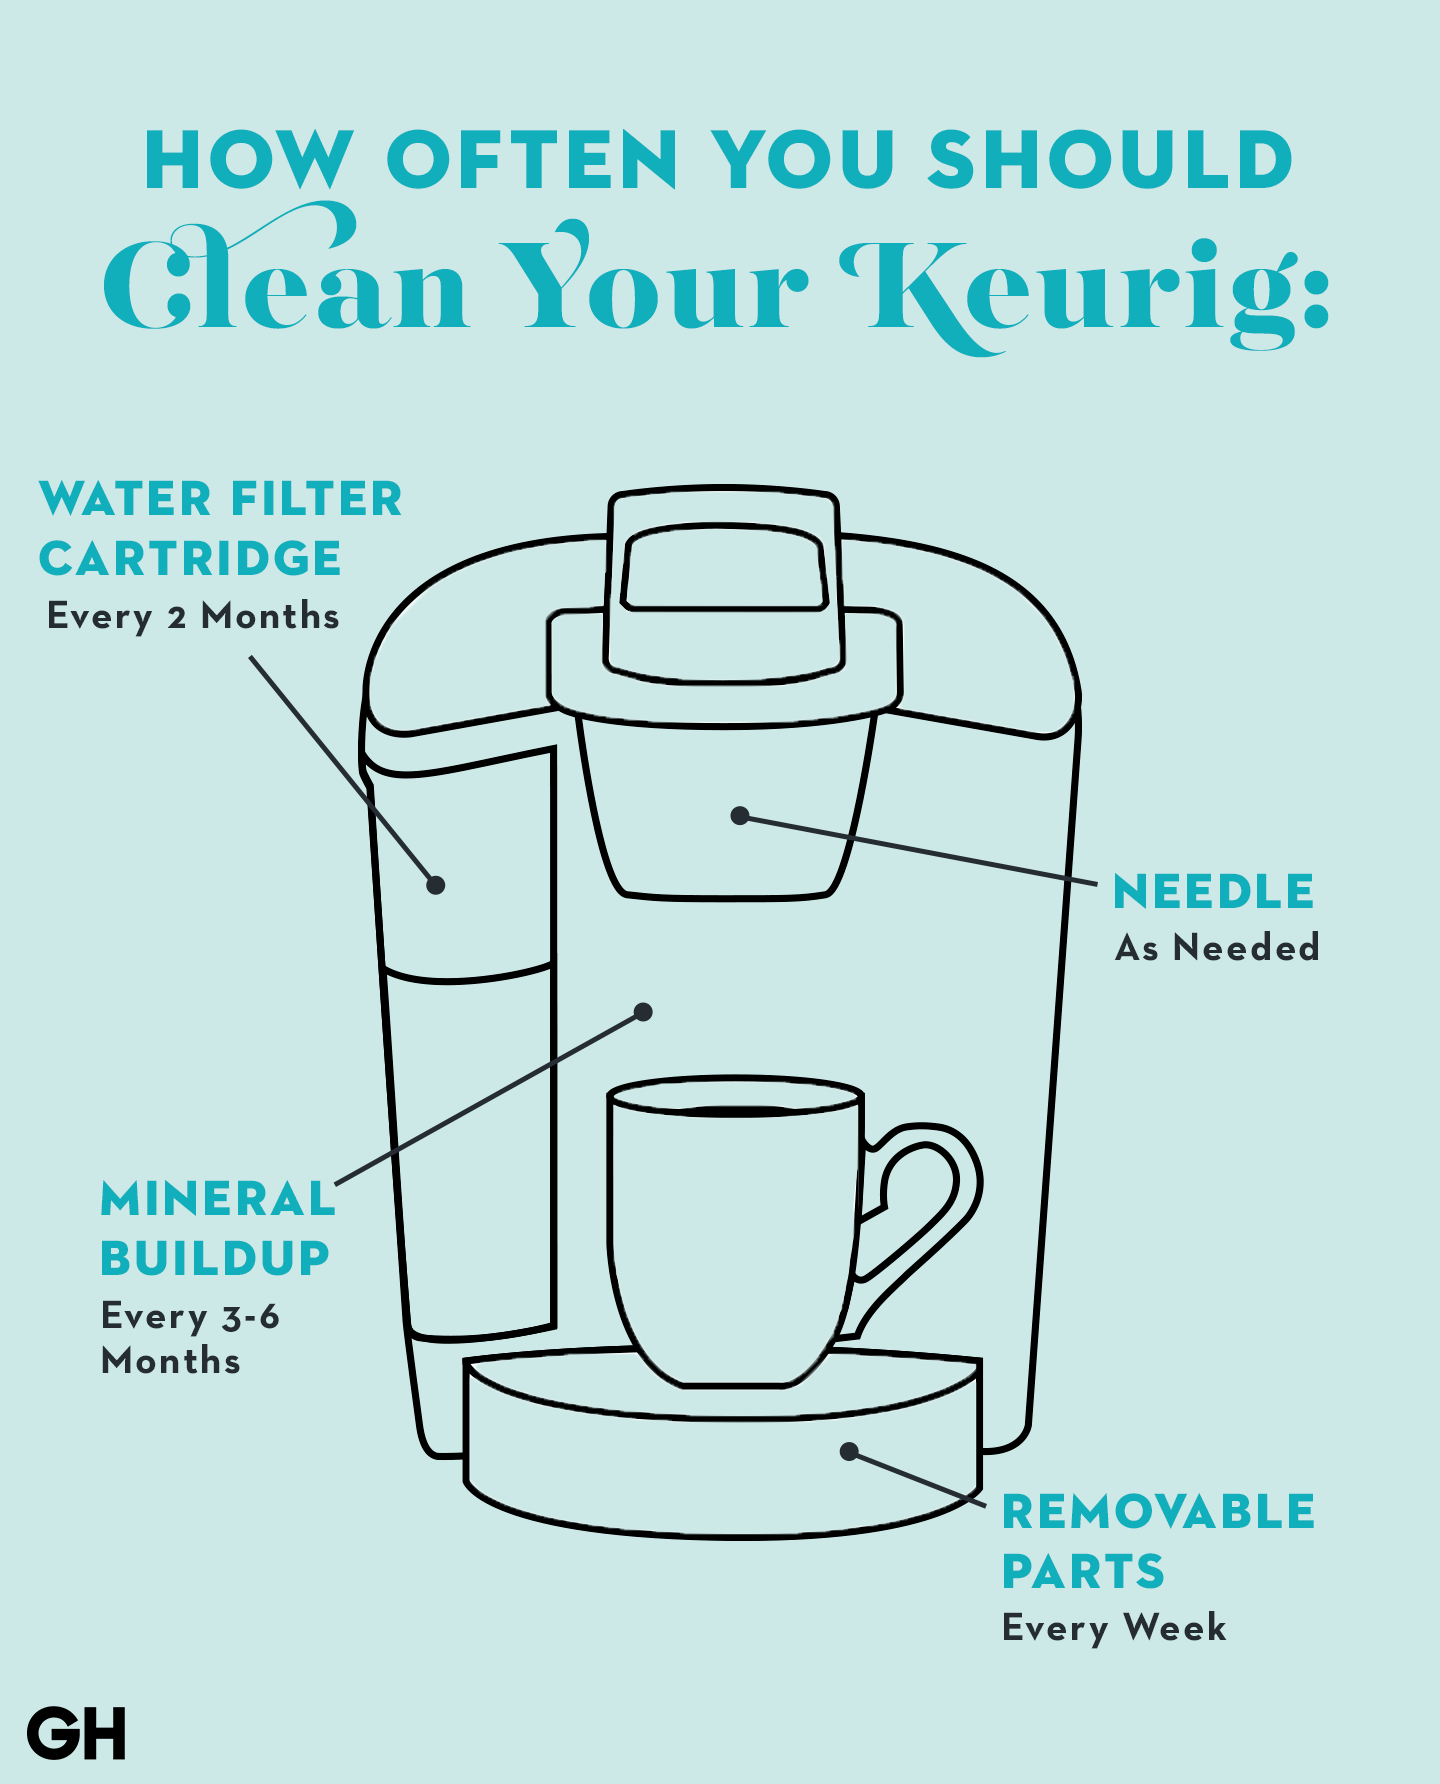 How To Fix Your Keurig That Drips After Brewing - CoffeeHolli.com